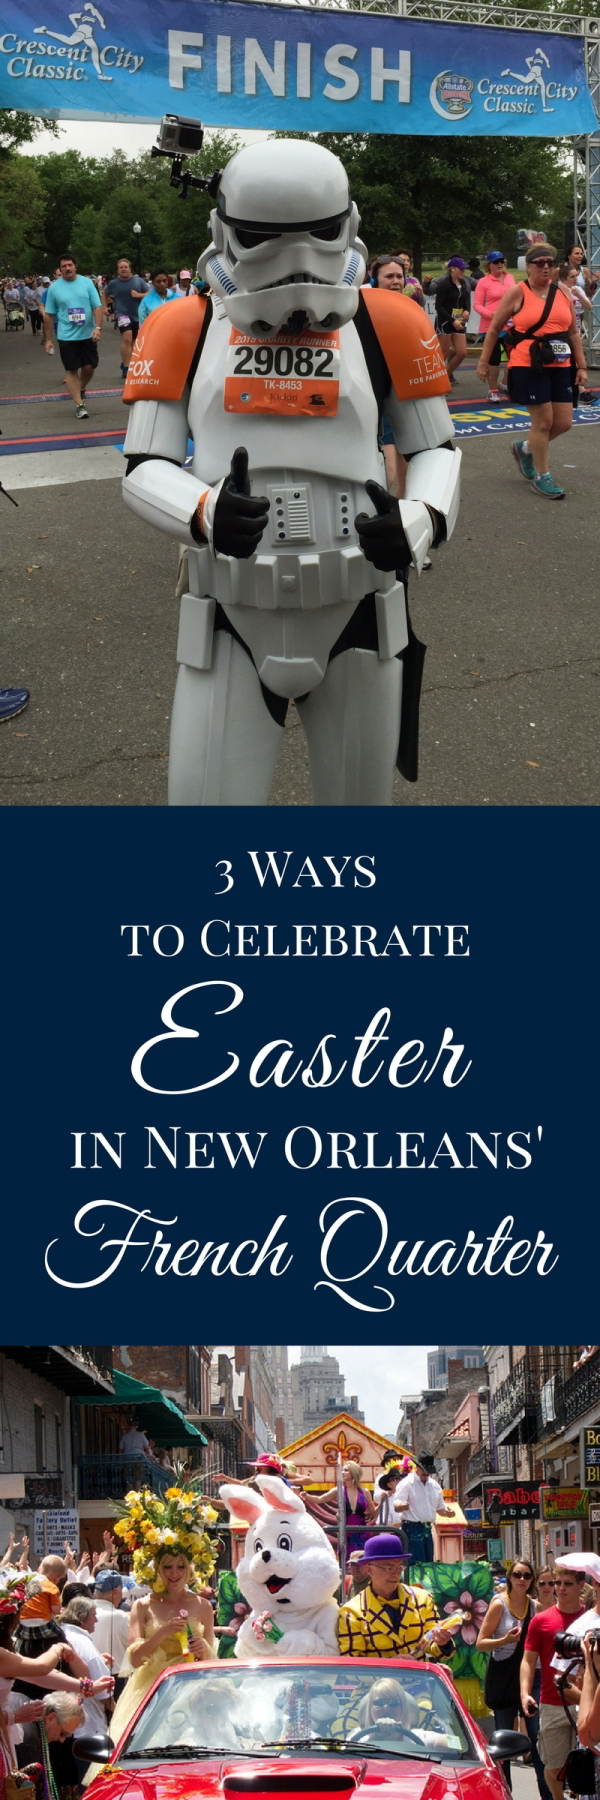 3 Ways To Celebrate Easter In New Orleans' French Quarter